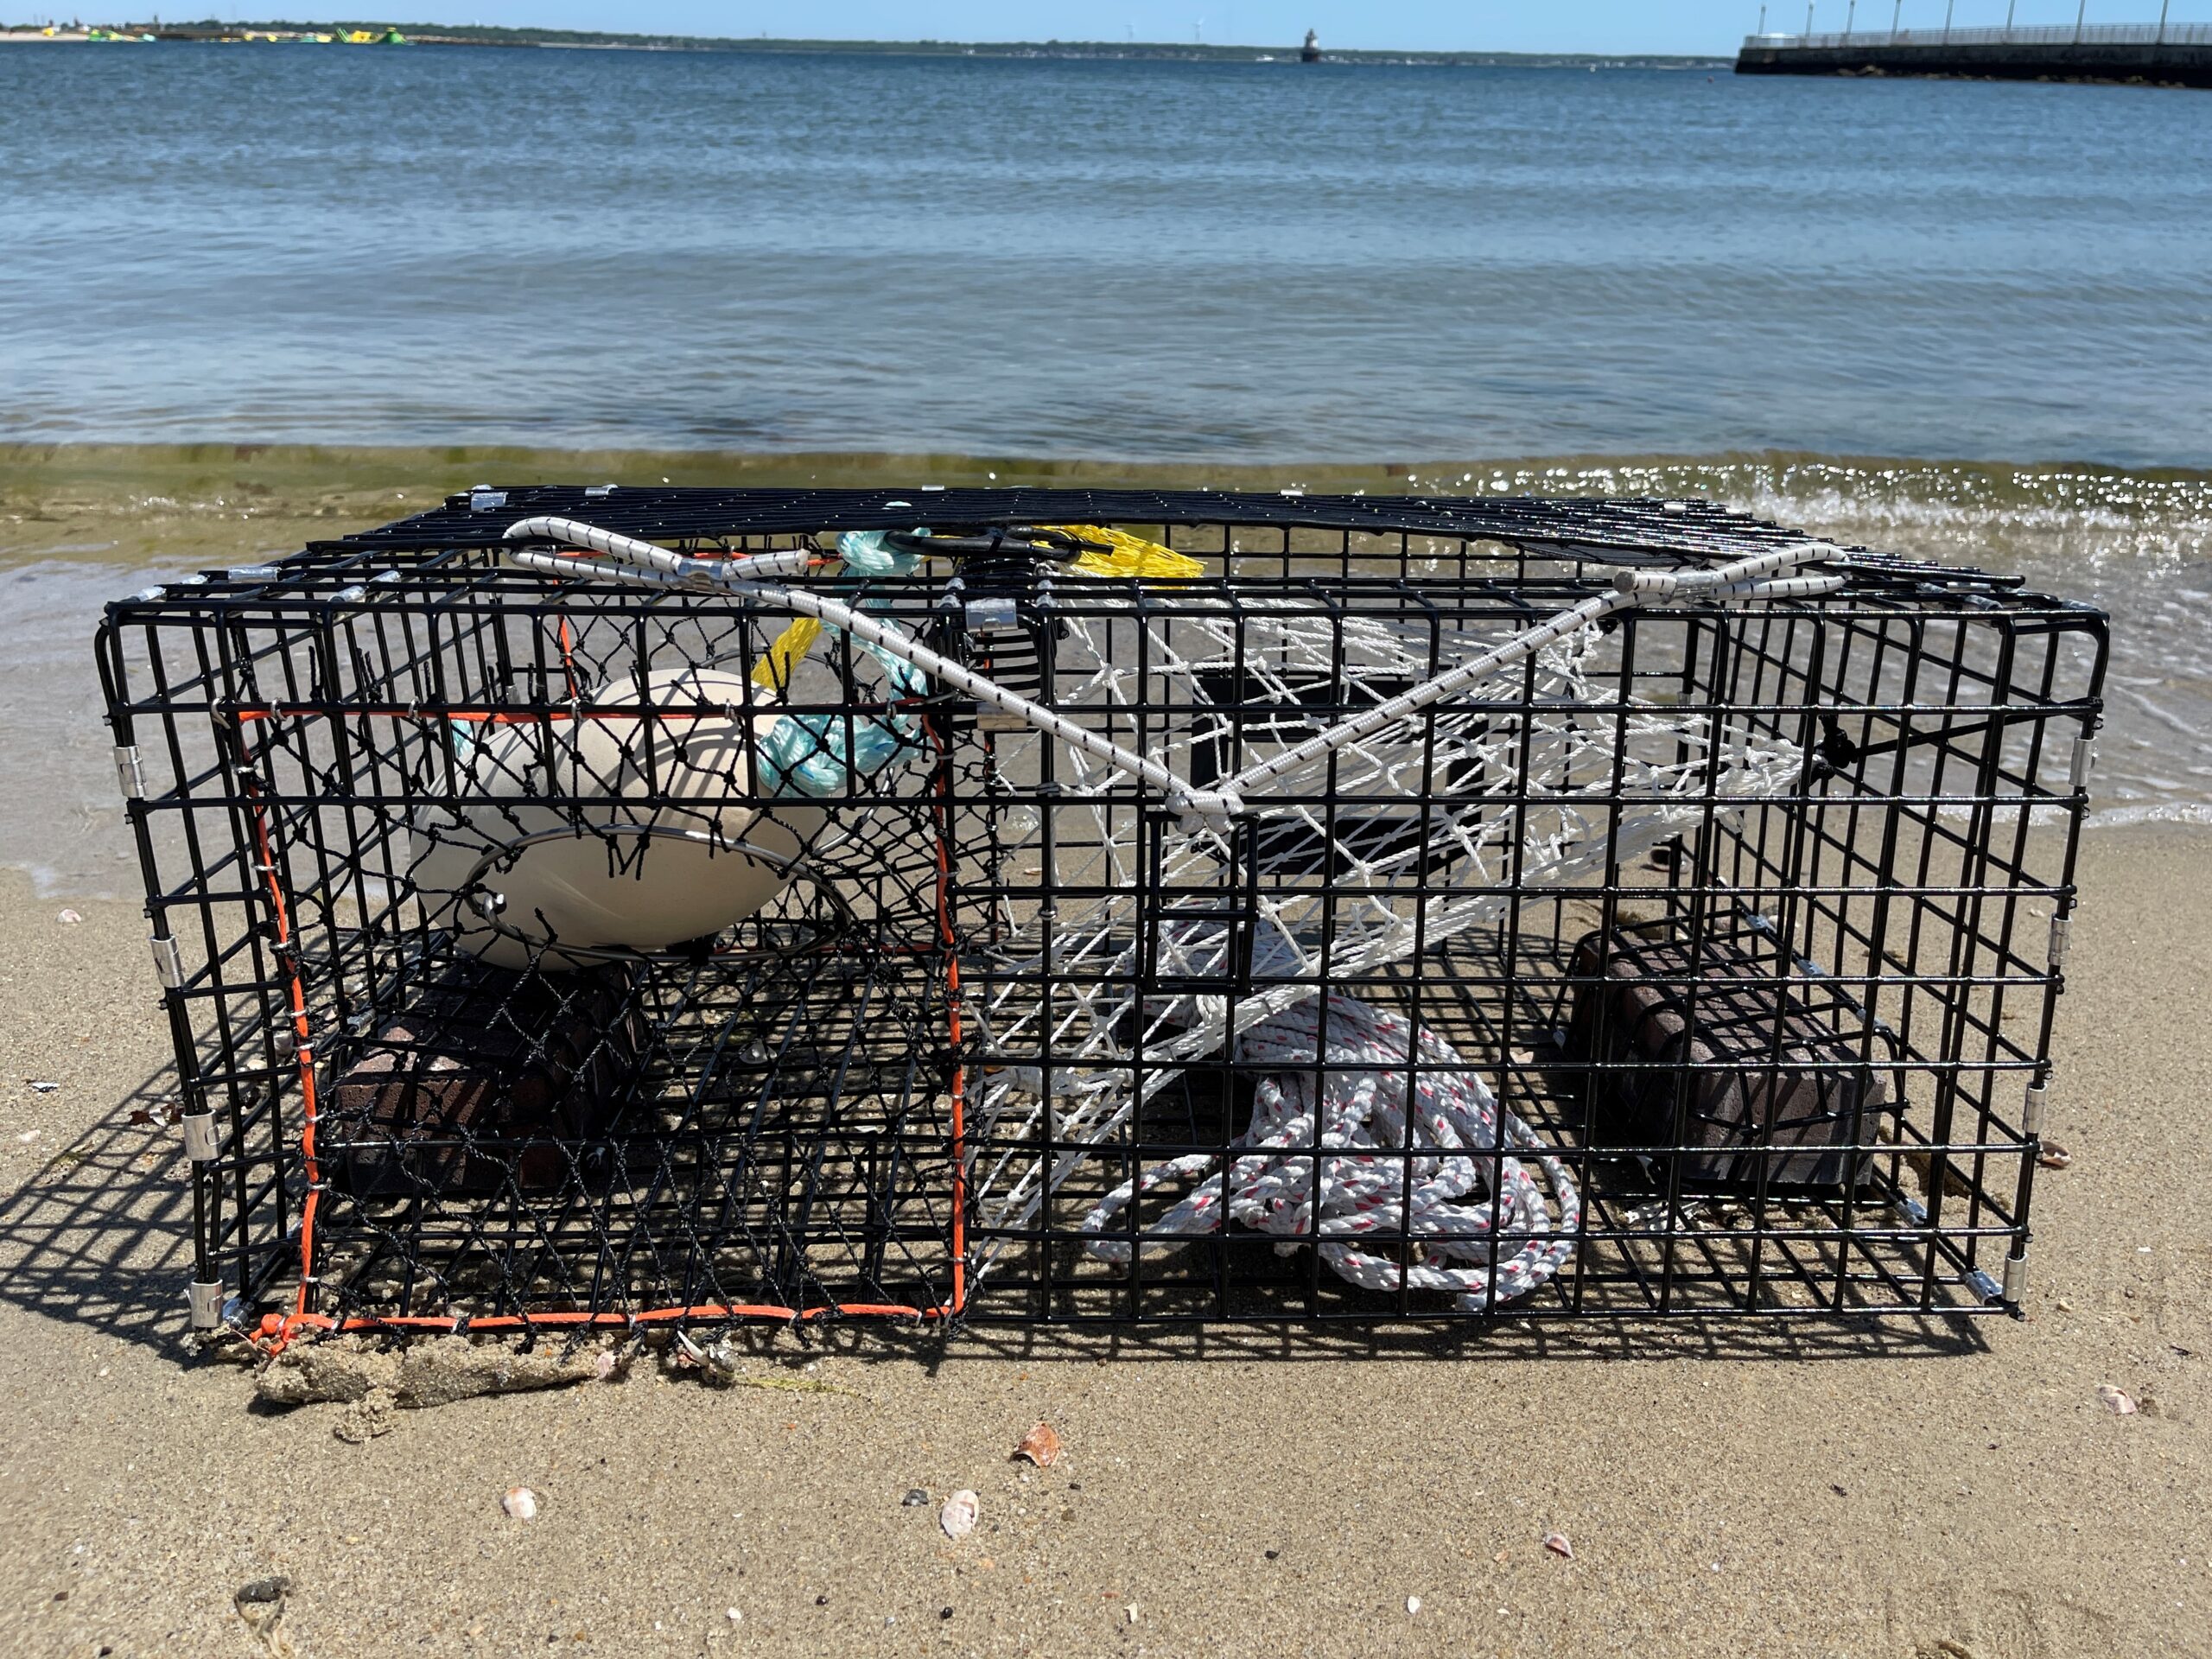 2 for Tee - Buy 2 Lobster Traps, Get a Free Tee!